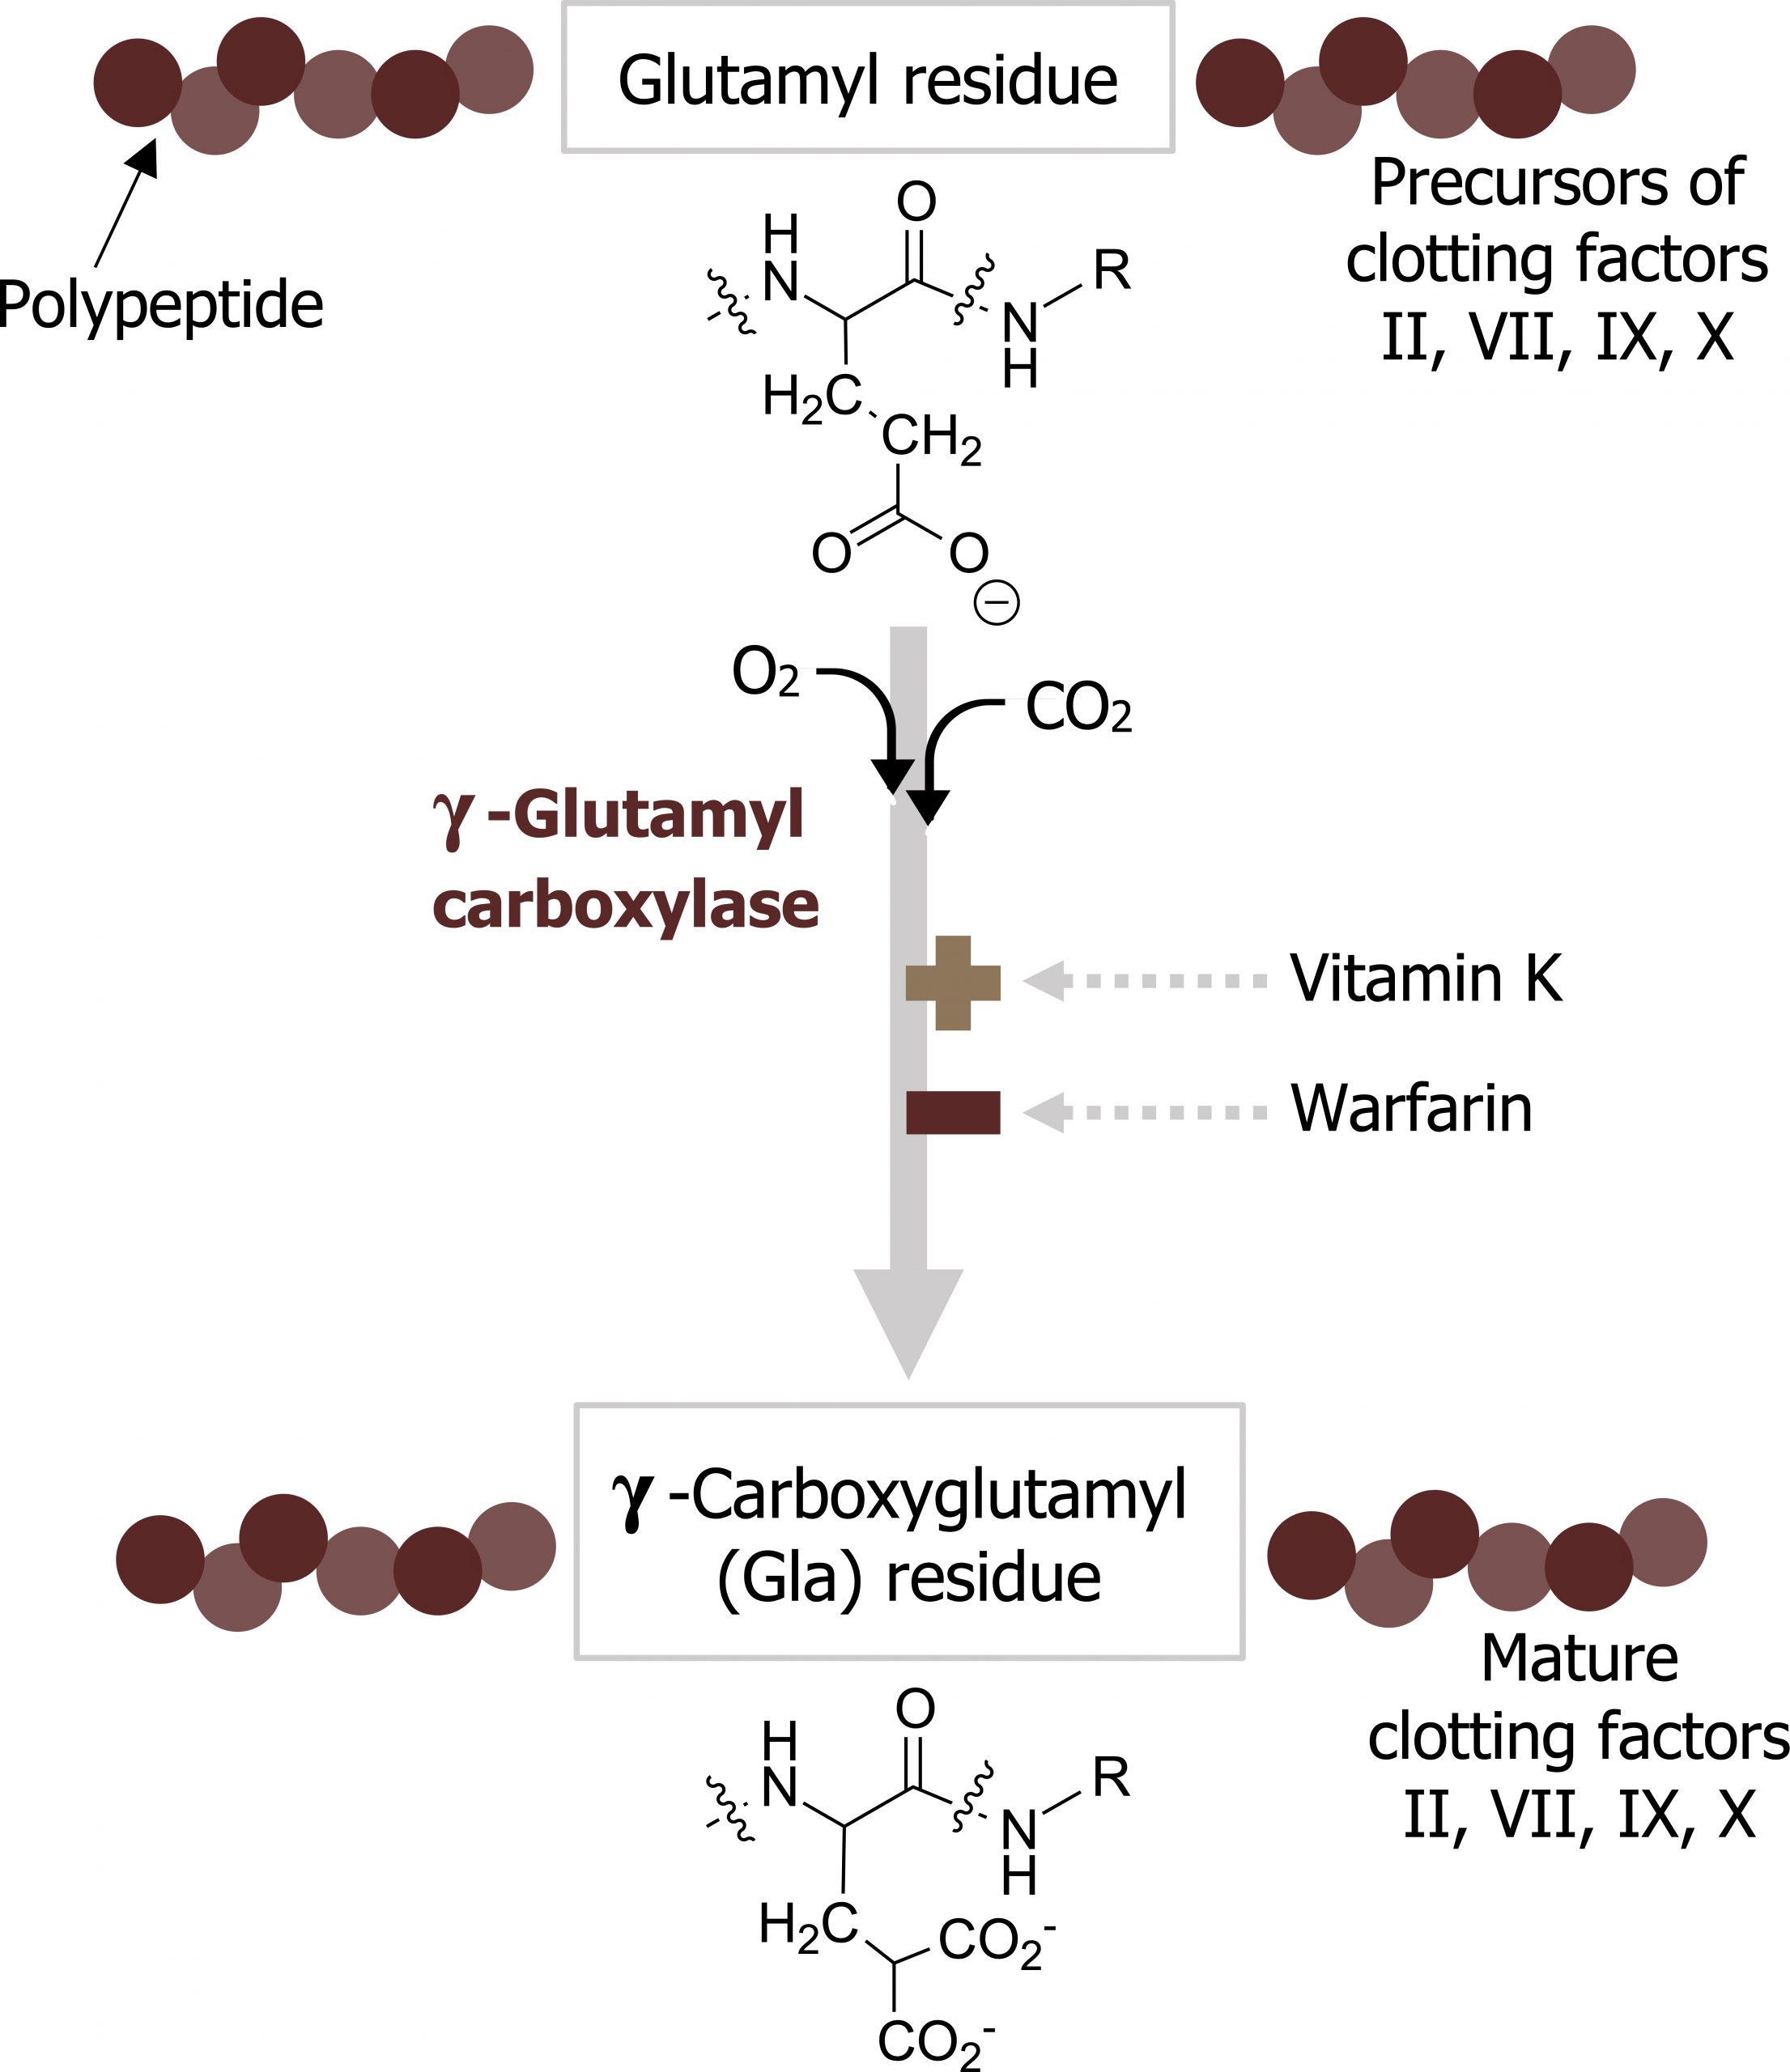 Glutamyl residue with a polypeptide to the left and precursors of clotting factors II, VII, IX, X to the right. Arrow with enzyme γ-glutamyl carboxylase and addition of O2 and CO2 to γ-carboxyglutamyl (Gla) residue with a polypeptide to the left and mature clotting factors II, VII, IX, X to the right. Vitamin K activates and warfarin inhibits the reaction.